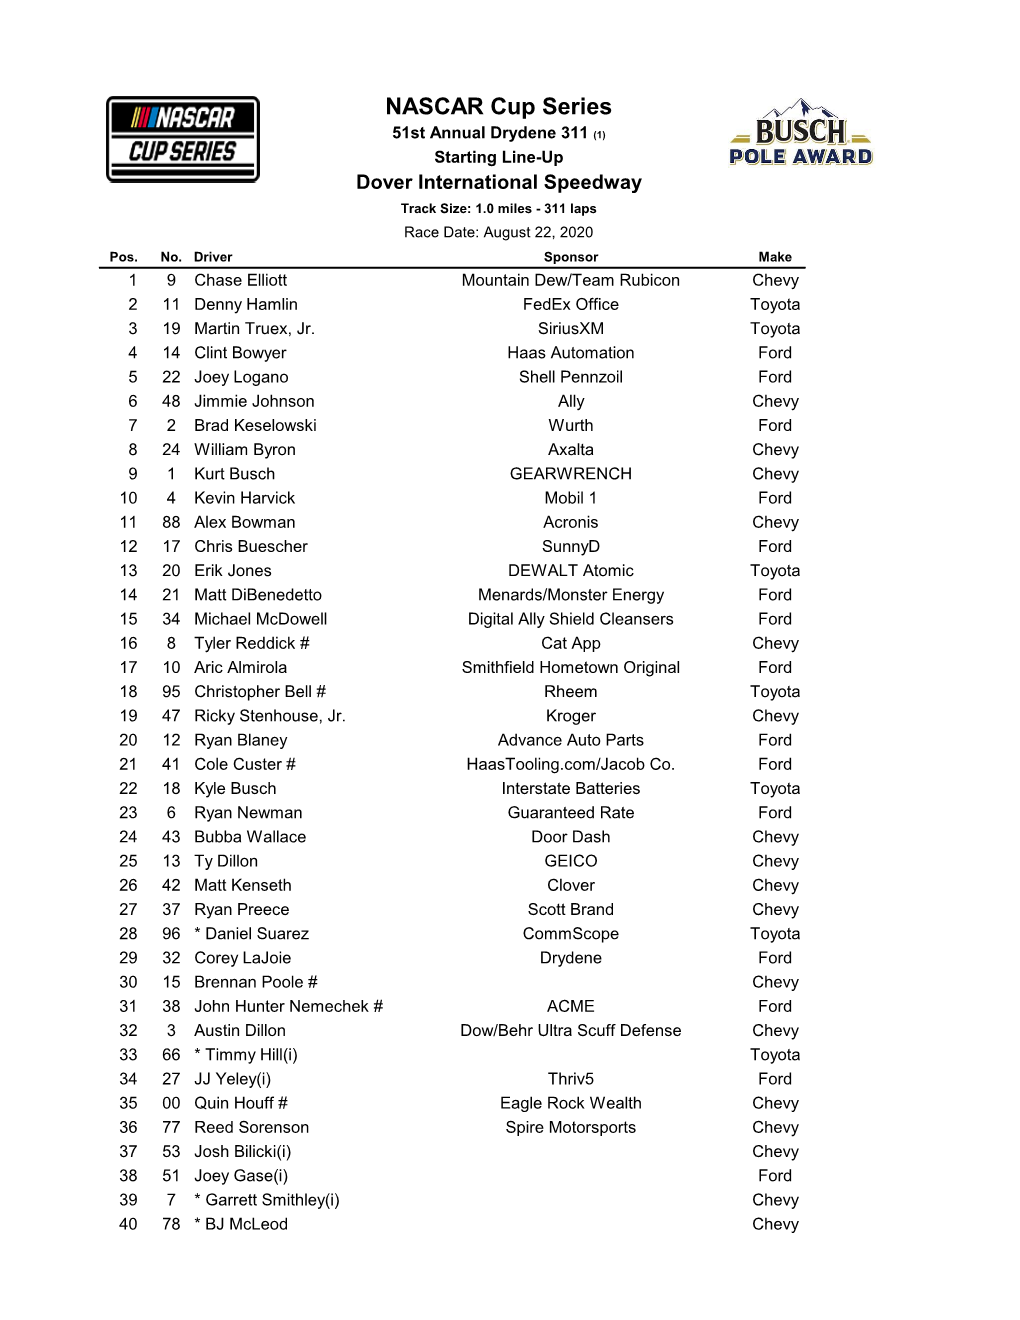 NASCAR Cup Series 51St Annual Drydene 311 (1) Starting Line-Up Dover International Speedway Track Size: 1.0 Miles - 311 Laps Race Date: August 22, 2020 Pos